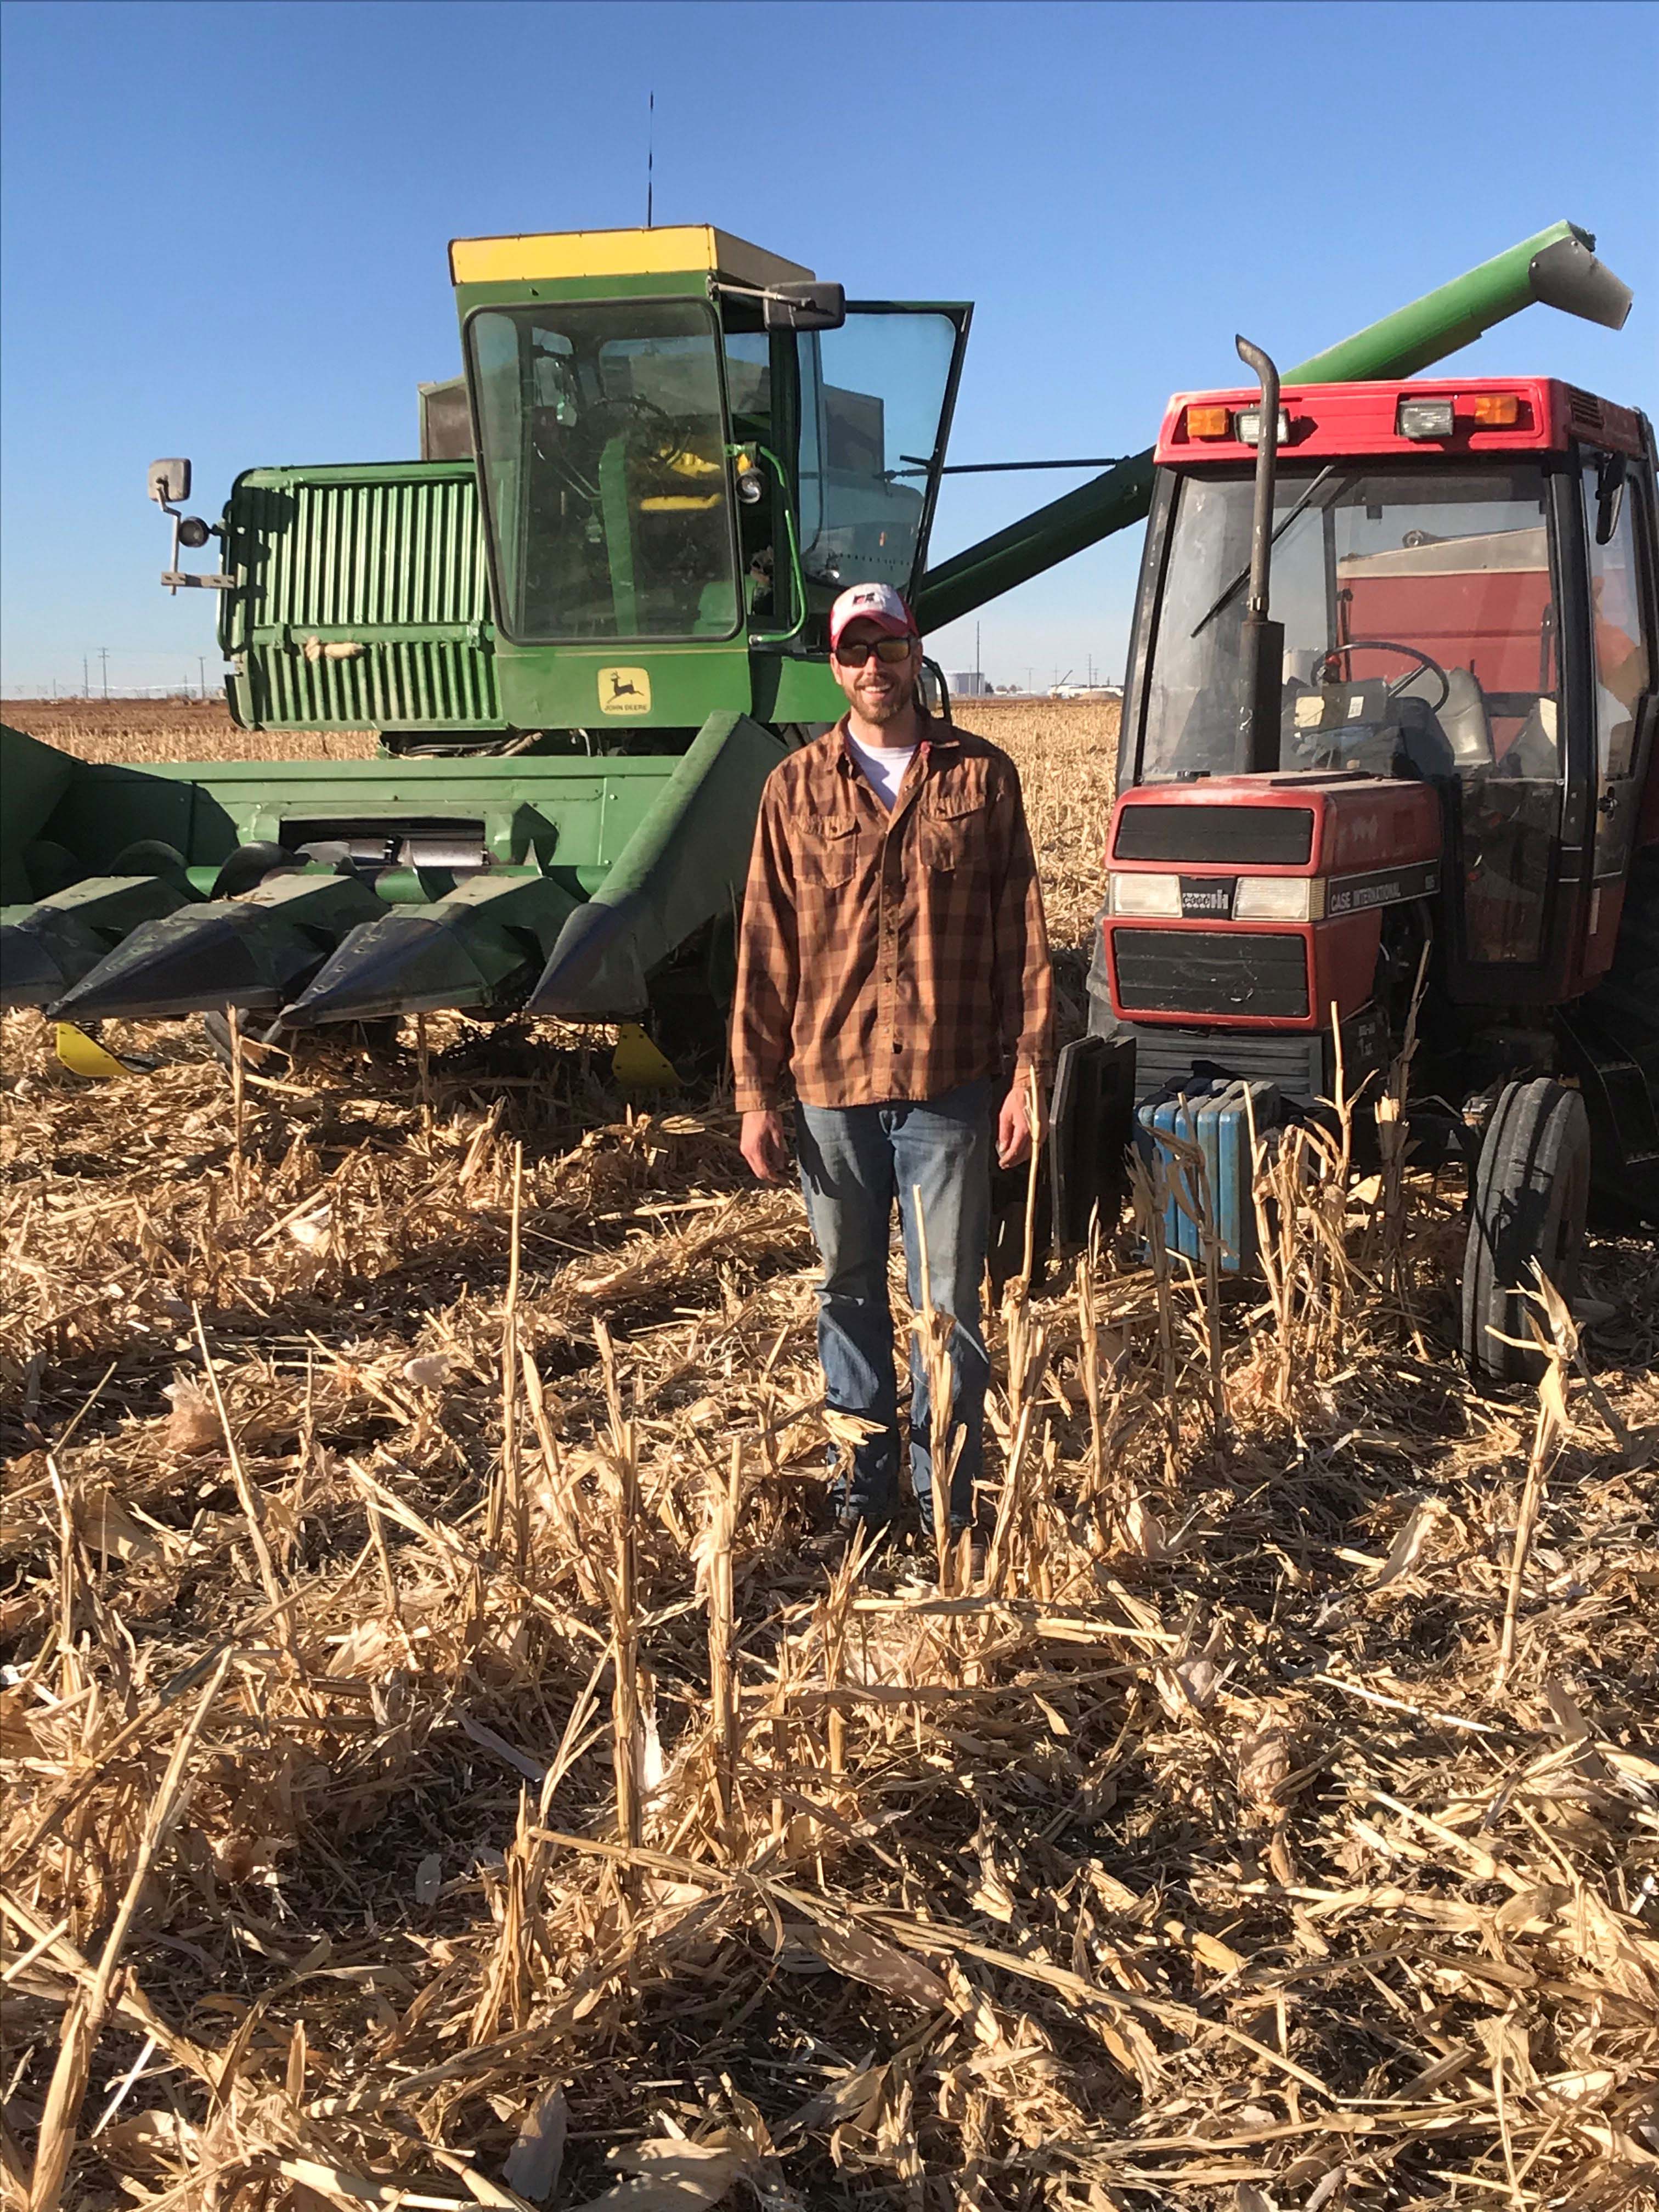 Ross Steward harvests corn at the USDA-ARS Limit Irrigation Research Farm near Greeley, Colorado. The native of Littleton credits trips to his grandparents’ farm and his college years, both in Nebraska, for a career path in crop management. (Courtesy photo)